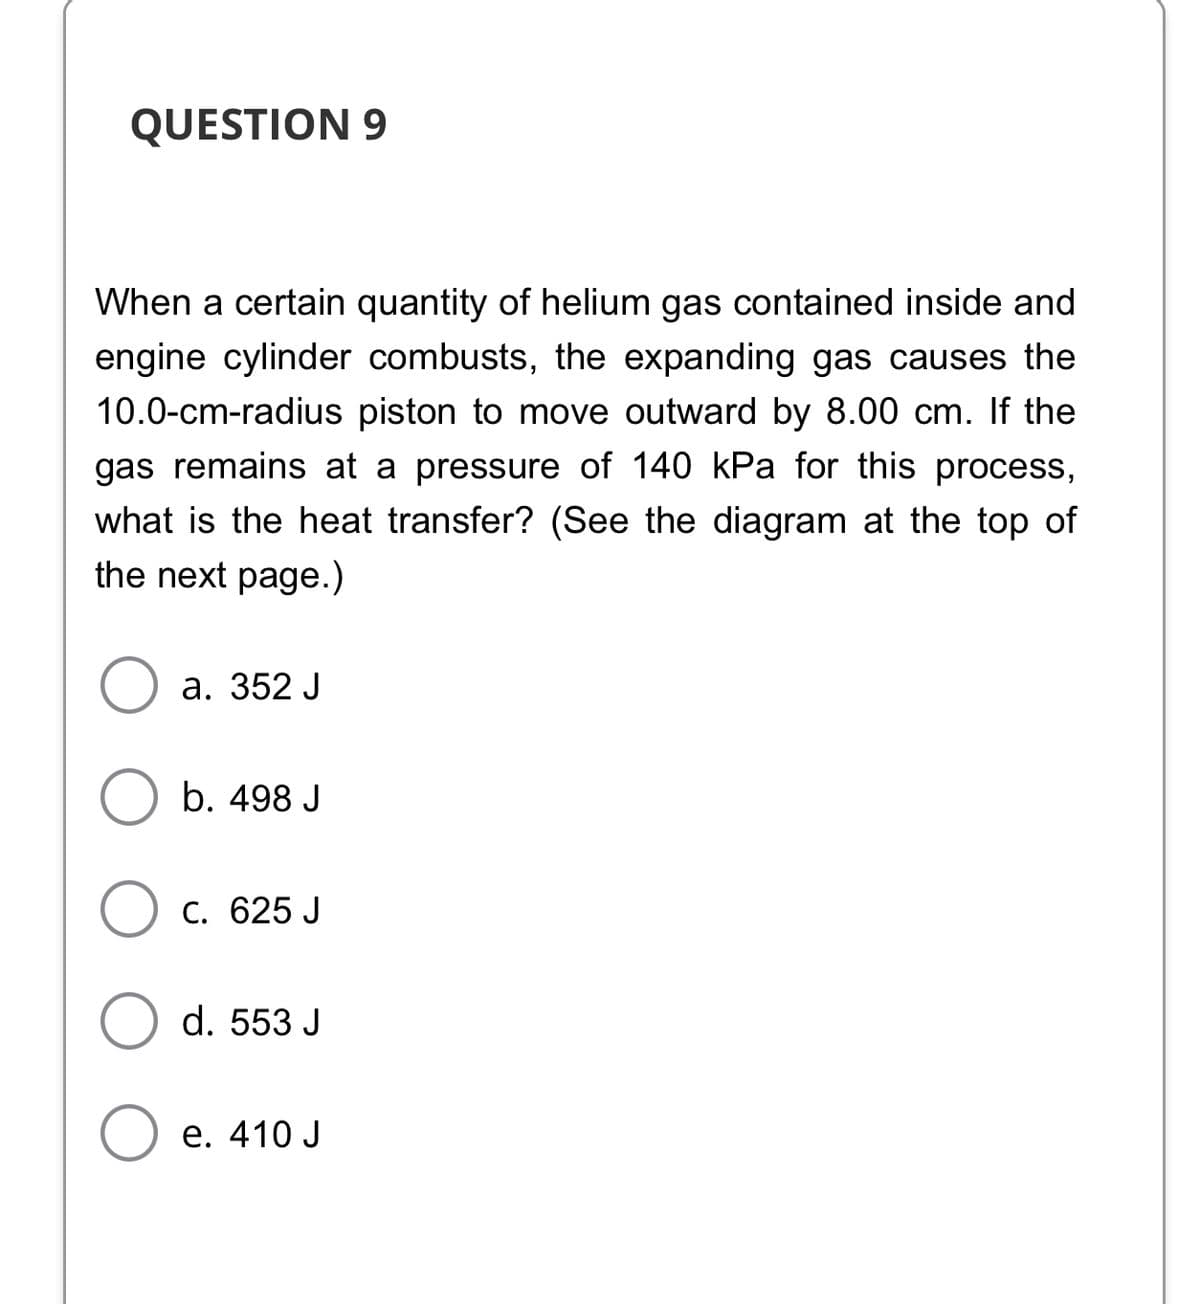 QUESTION 9
When a certain quantity of helium gas contained inside and
engine cylinder combusts, the expanding gas causes the
10.0-cm-radius piston to move outward by 8.00 cm. If the
gas remains at a pressure of 140 kPa for this process,
what is the heat transfer? (See the diagram at the top of
the next page.)
а. 352 J
b. 498 J
C. 625 J
d. 553 J
е. 410 J
